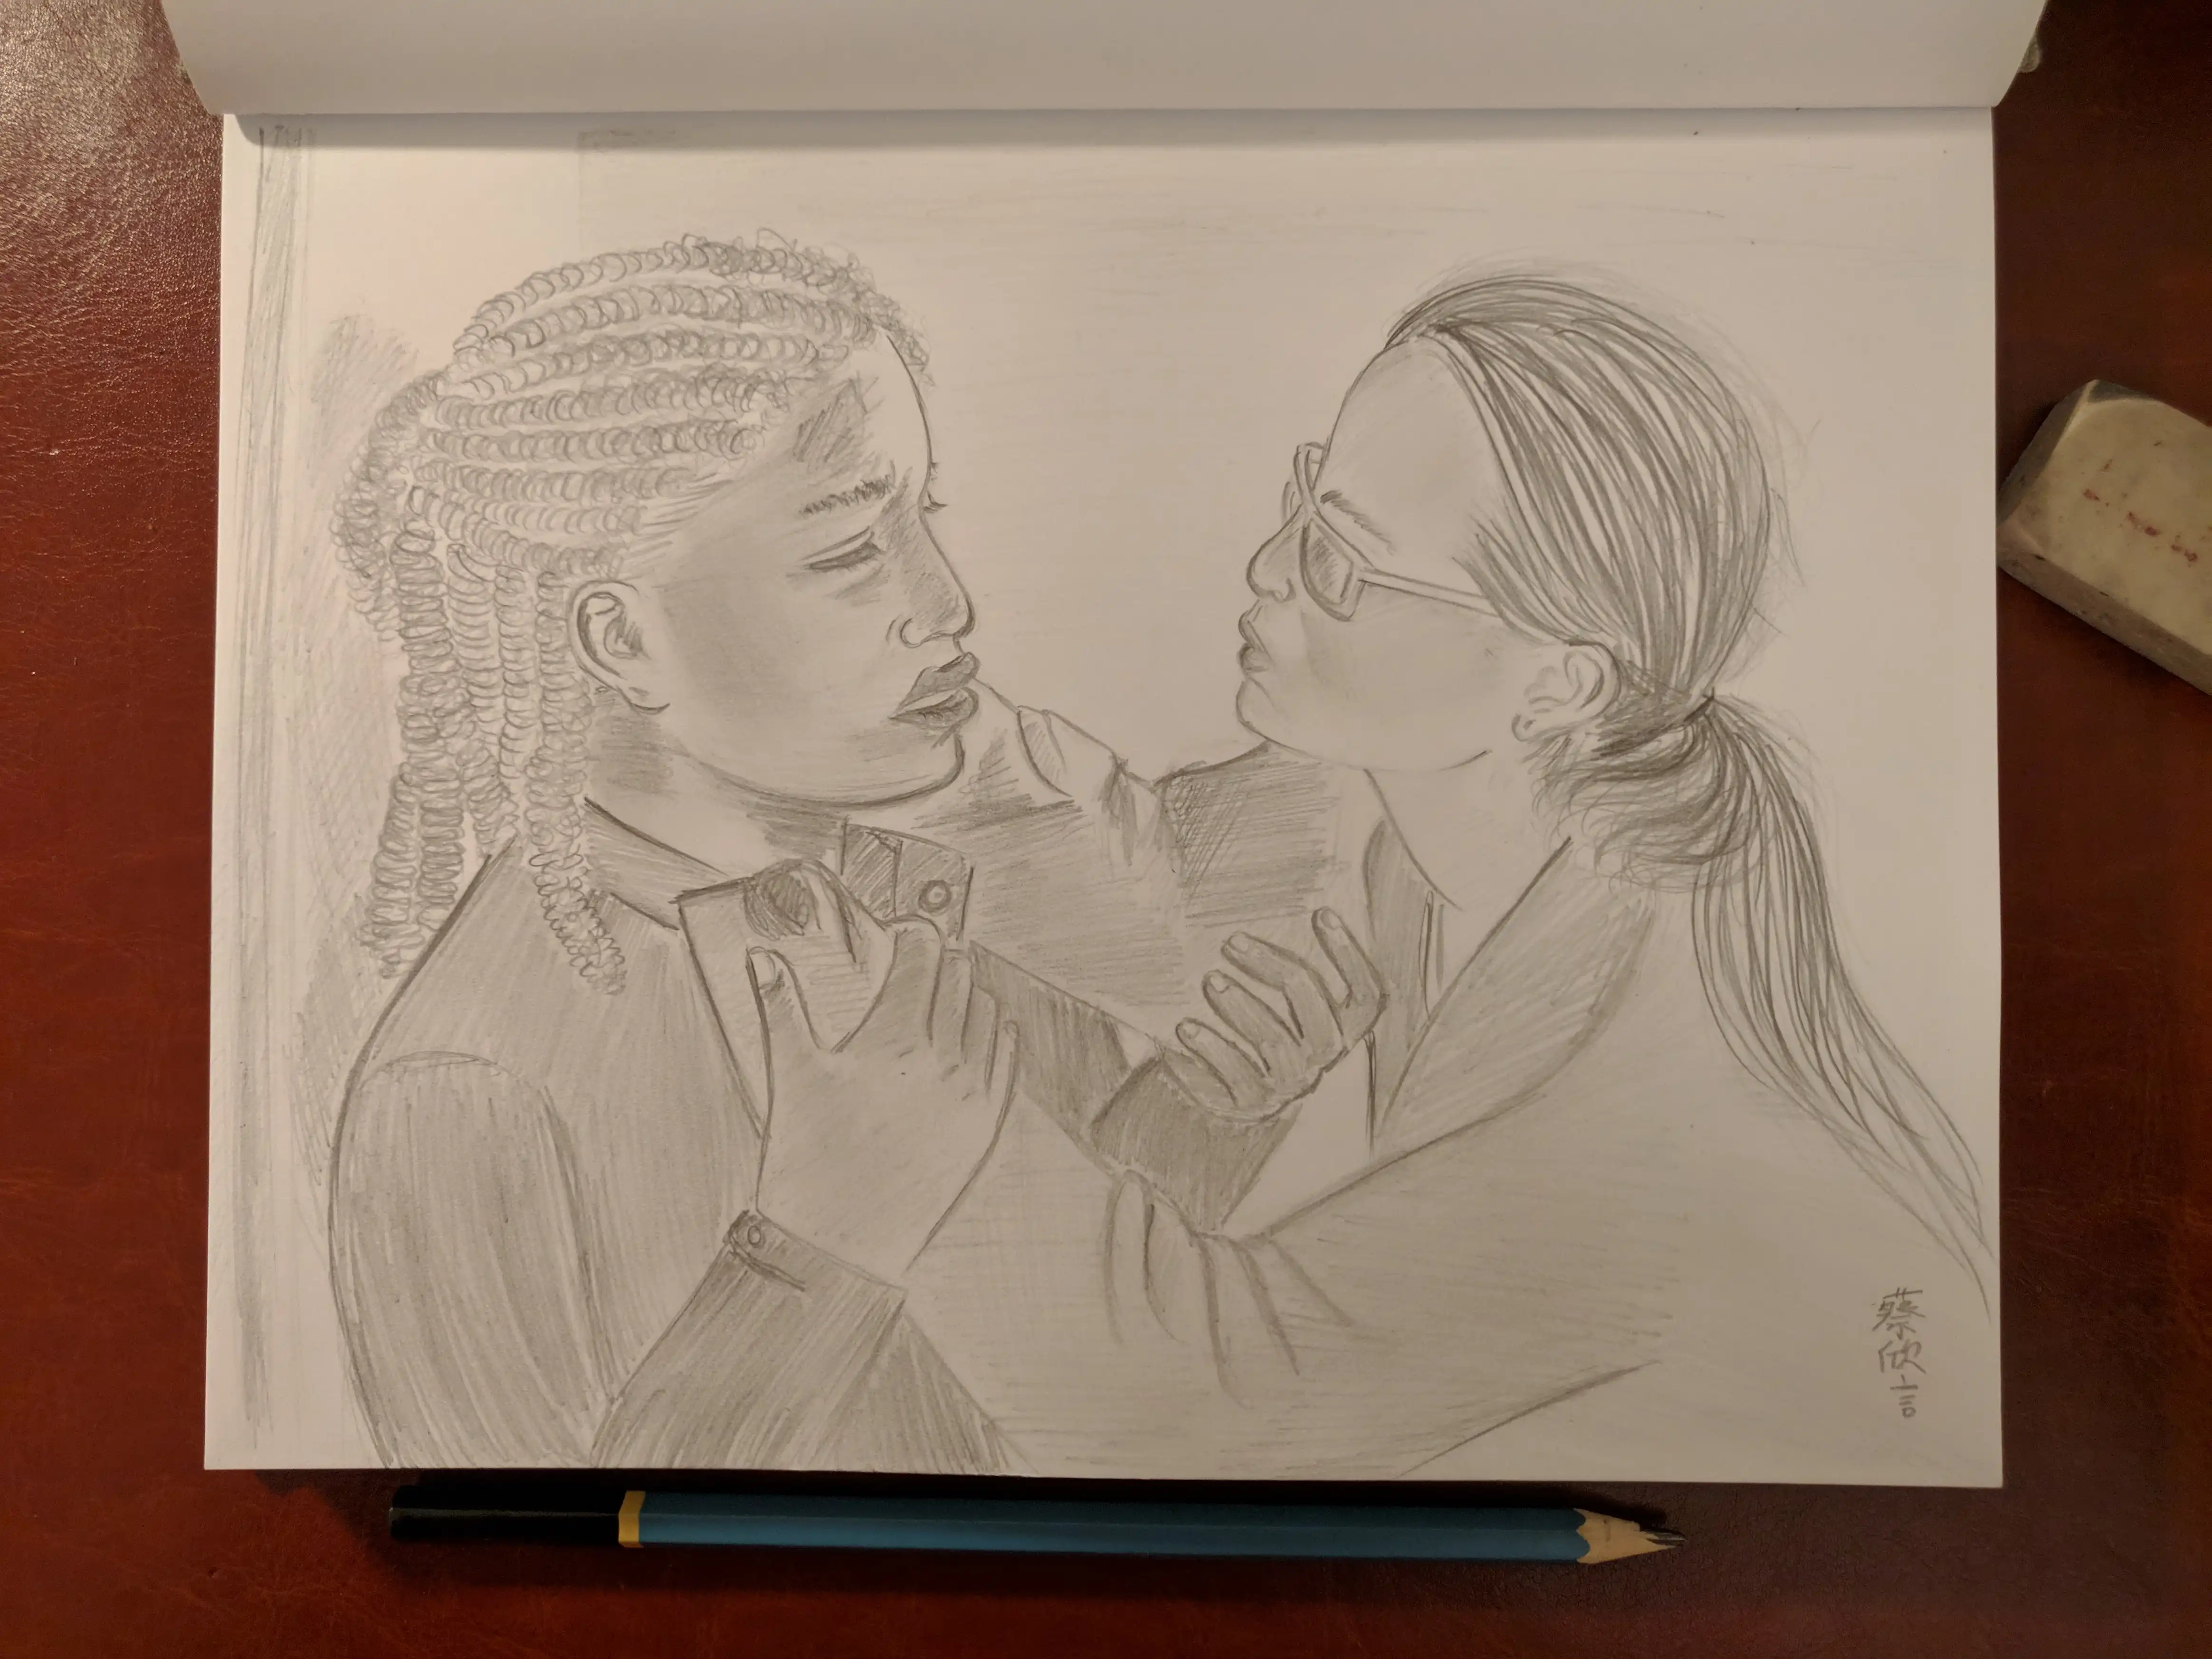 Sketch of Agent 355 and Dr. Mann looking into each other's eyes with yearning. Agent 355 has dreads and is holding Dr. Mann by her wrists. Dr. Mann is looking up through her glasses, almond-shaped eyes crinkling and hair pulled back into ponytail. Art by Yan-Yin K. Choy